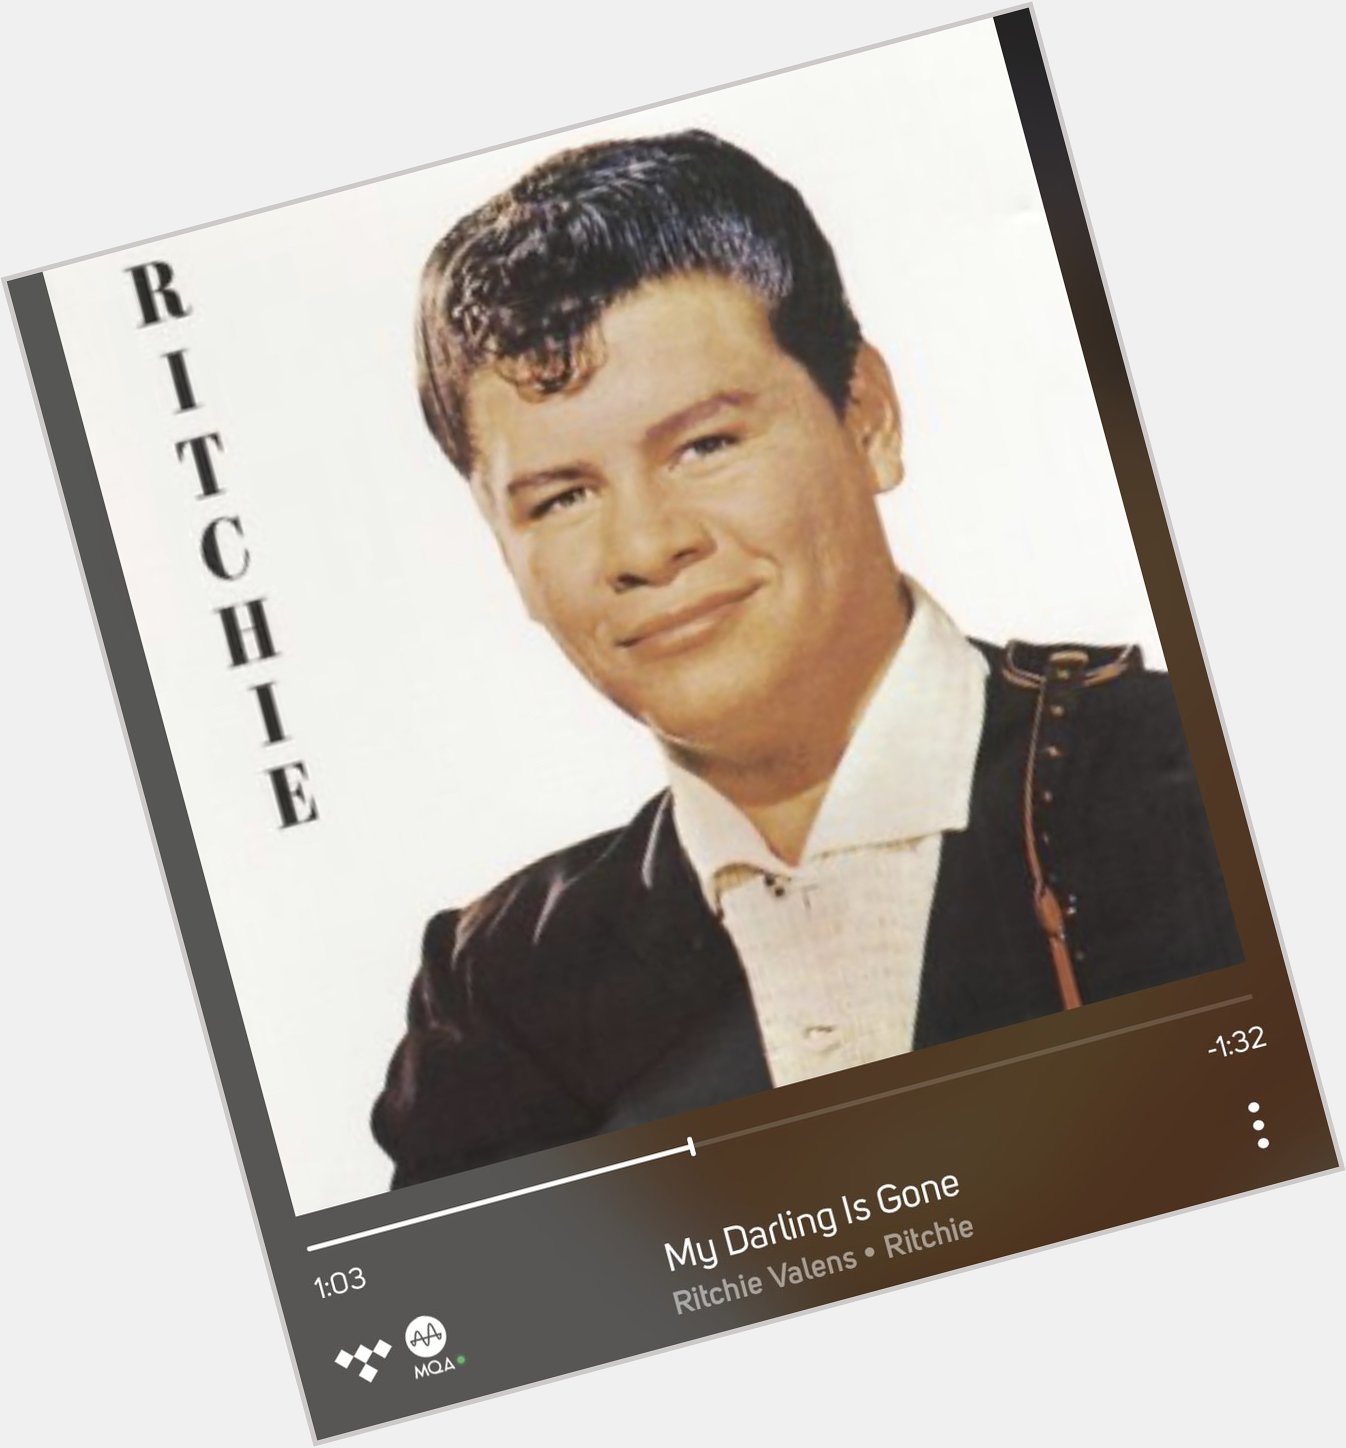 Happy birthday Ritchie Valens. Gone but never forgotten. 